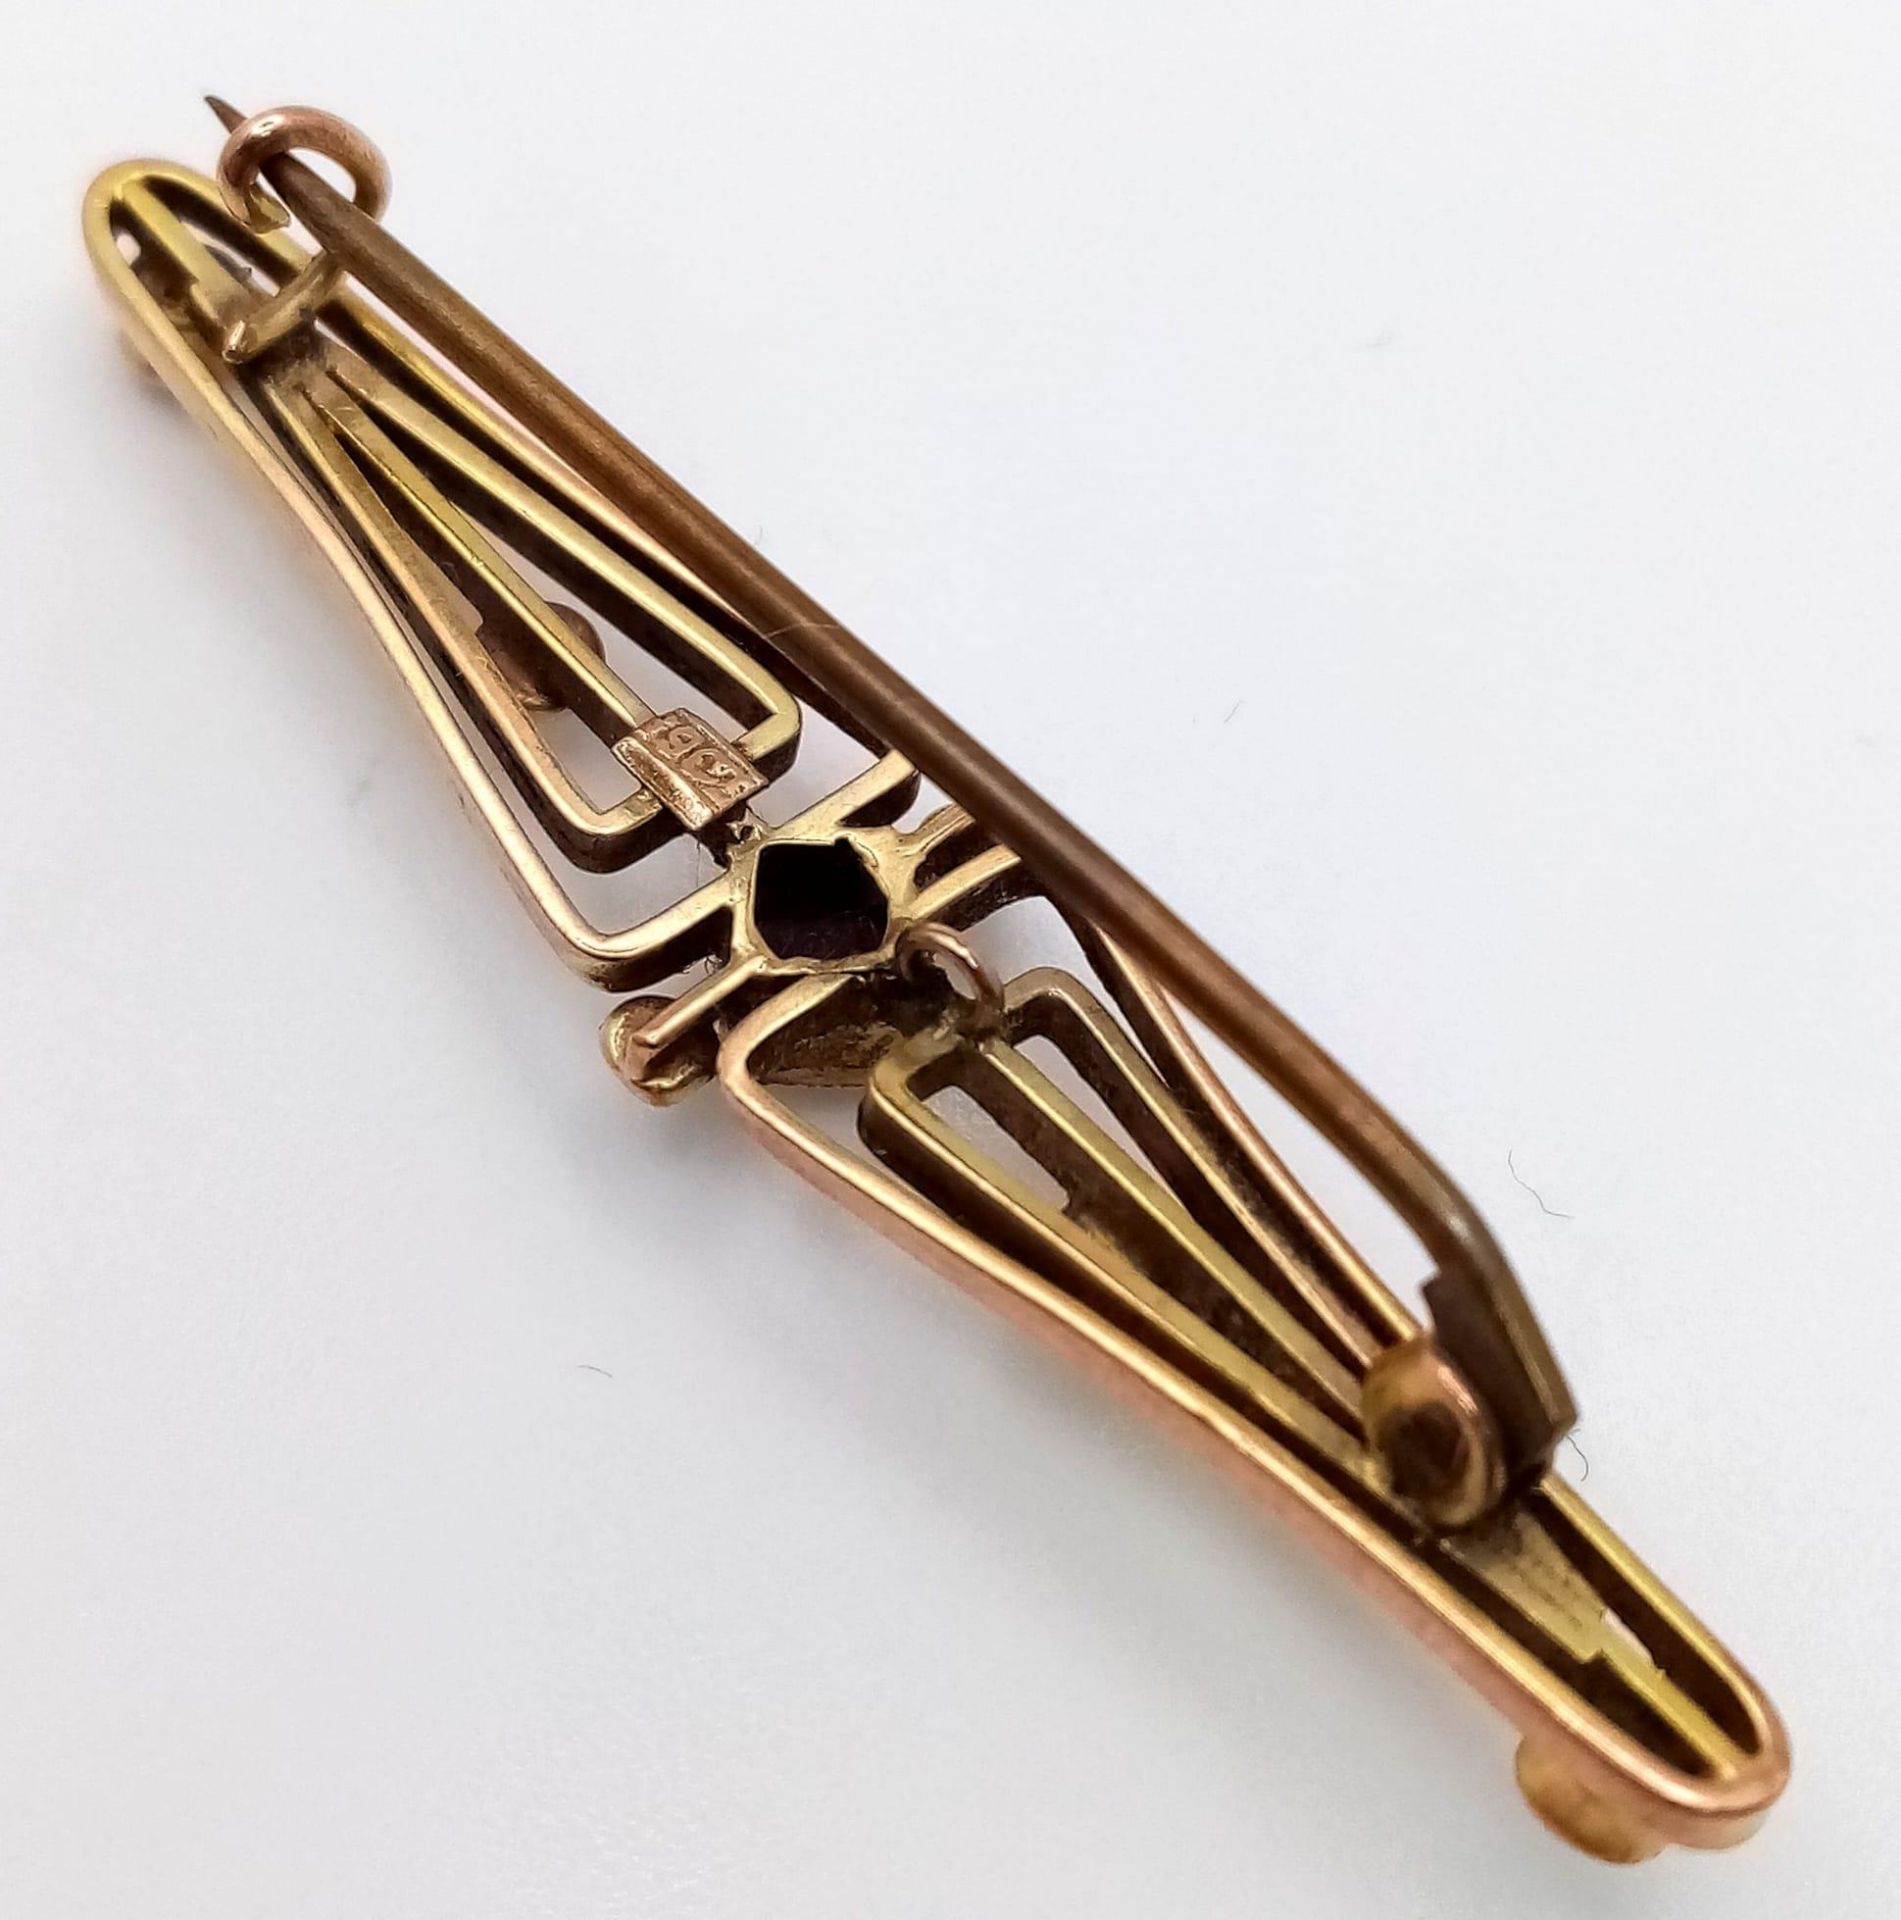 An ART DECO 9 K yellow gold brooch with seed pearls and amethysts. Length: 47 mm, weight: 3 g. - Image 2 of 4